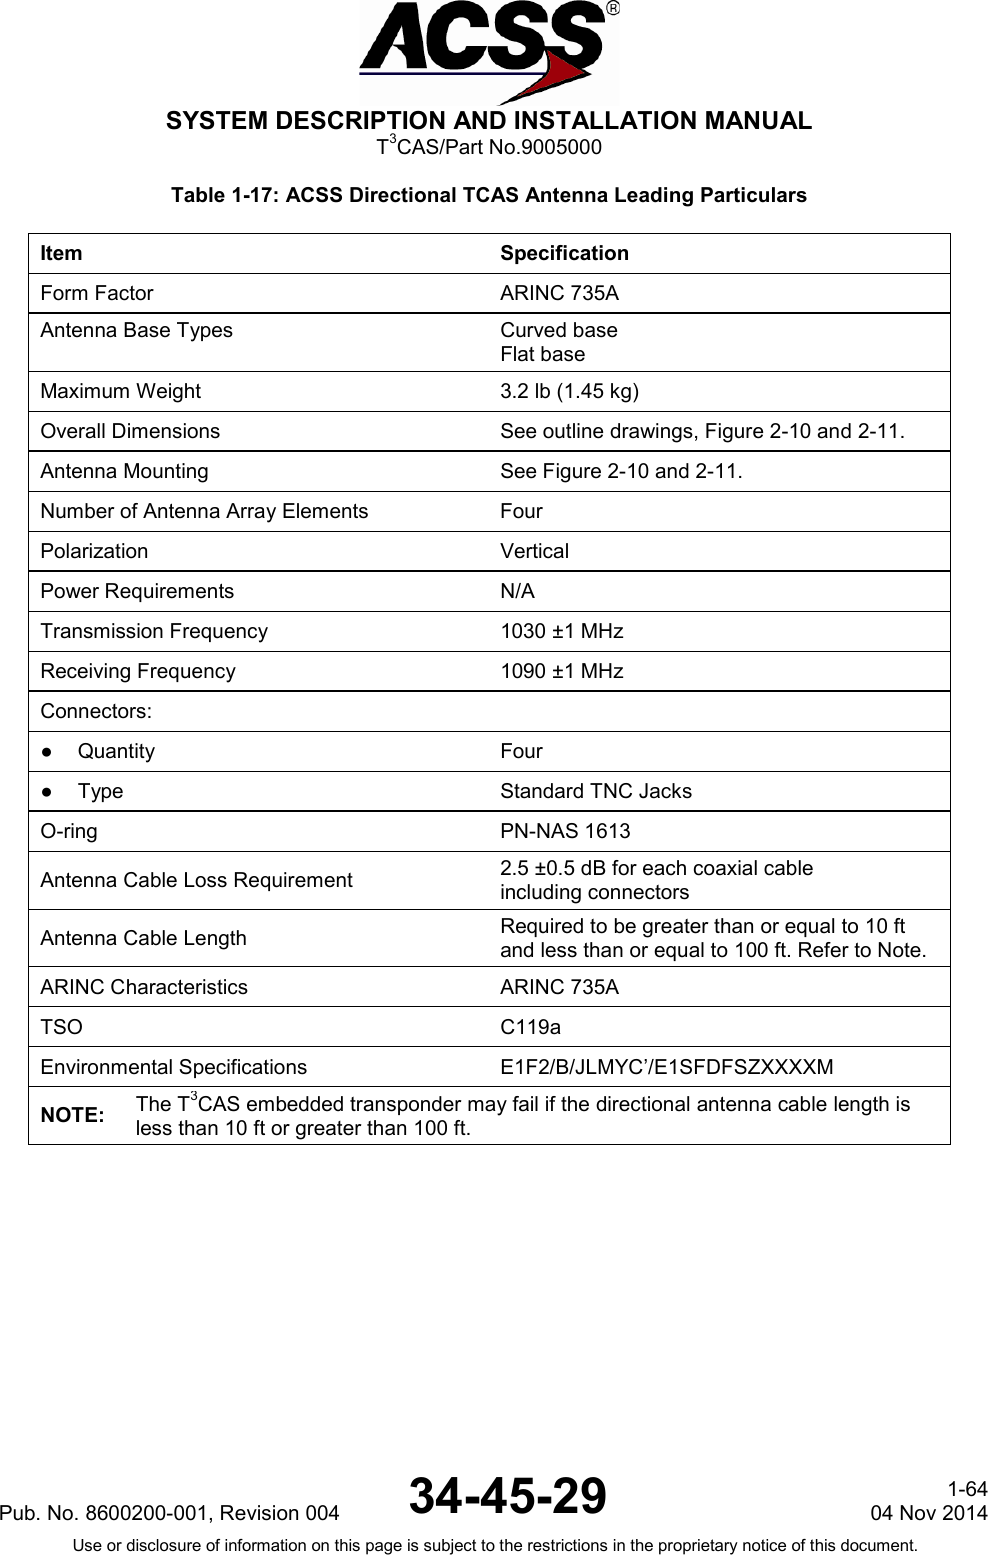  SYSTEM DESCRIPTION AND INSTALLATION MANUAL T3CAS/Part No.9005000 Table 1-17: ACSS Directional TCAS Antenna Leading Particulars Item Specification Form Factor ARINC 735A Antenna Base Types Curved base Flat base Maximum Weight 3.2 lb (1.45 kg) Overall Dimensions See outline drawings, Figure 2-10 and 2-11. Antenna Mounting See Figure 2-10 and 2-11. Number of Antenna Array Elements Four Polarization Vertical Power Requirements N/A Transmission Frequency 1030 ±1 MHz Receiving Frequency 1090 ±1 MHz Connectors:   ●  Quantity Four ●  Type Standard TNC Jacks O-ring PN-NAS 1613 Antenna Cable Loss Requirement 2.5 ±0.5 dB for each coaxial cable including connectors Antenna Cable Length   Required to be greater than or equal to 10 ft and less than or equal to 100 ft. Refer to Note. ARINC Characteristics ARINC 735A TSO C119a Environmental Specifications  E1F2/B/JLMYC’/E1SFDFSZXXXXM NOTE: The T3CAS embedded transponder may fail if the directional antenna cable length is less than 10 ft or greater than 100 ft. Pub. No. 8600200-001, Revision 004 34-45-29 1-64 04 Nov 2014 Use or disclosure of information on this page is subject to the restrictions in the proprietary notice of this document.  